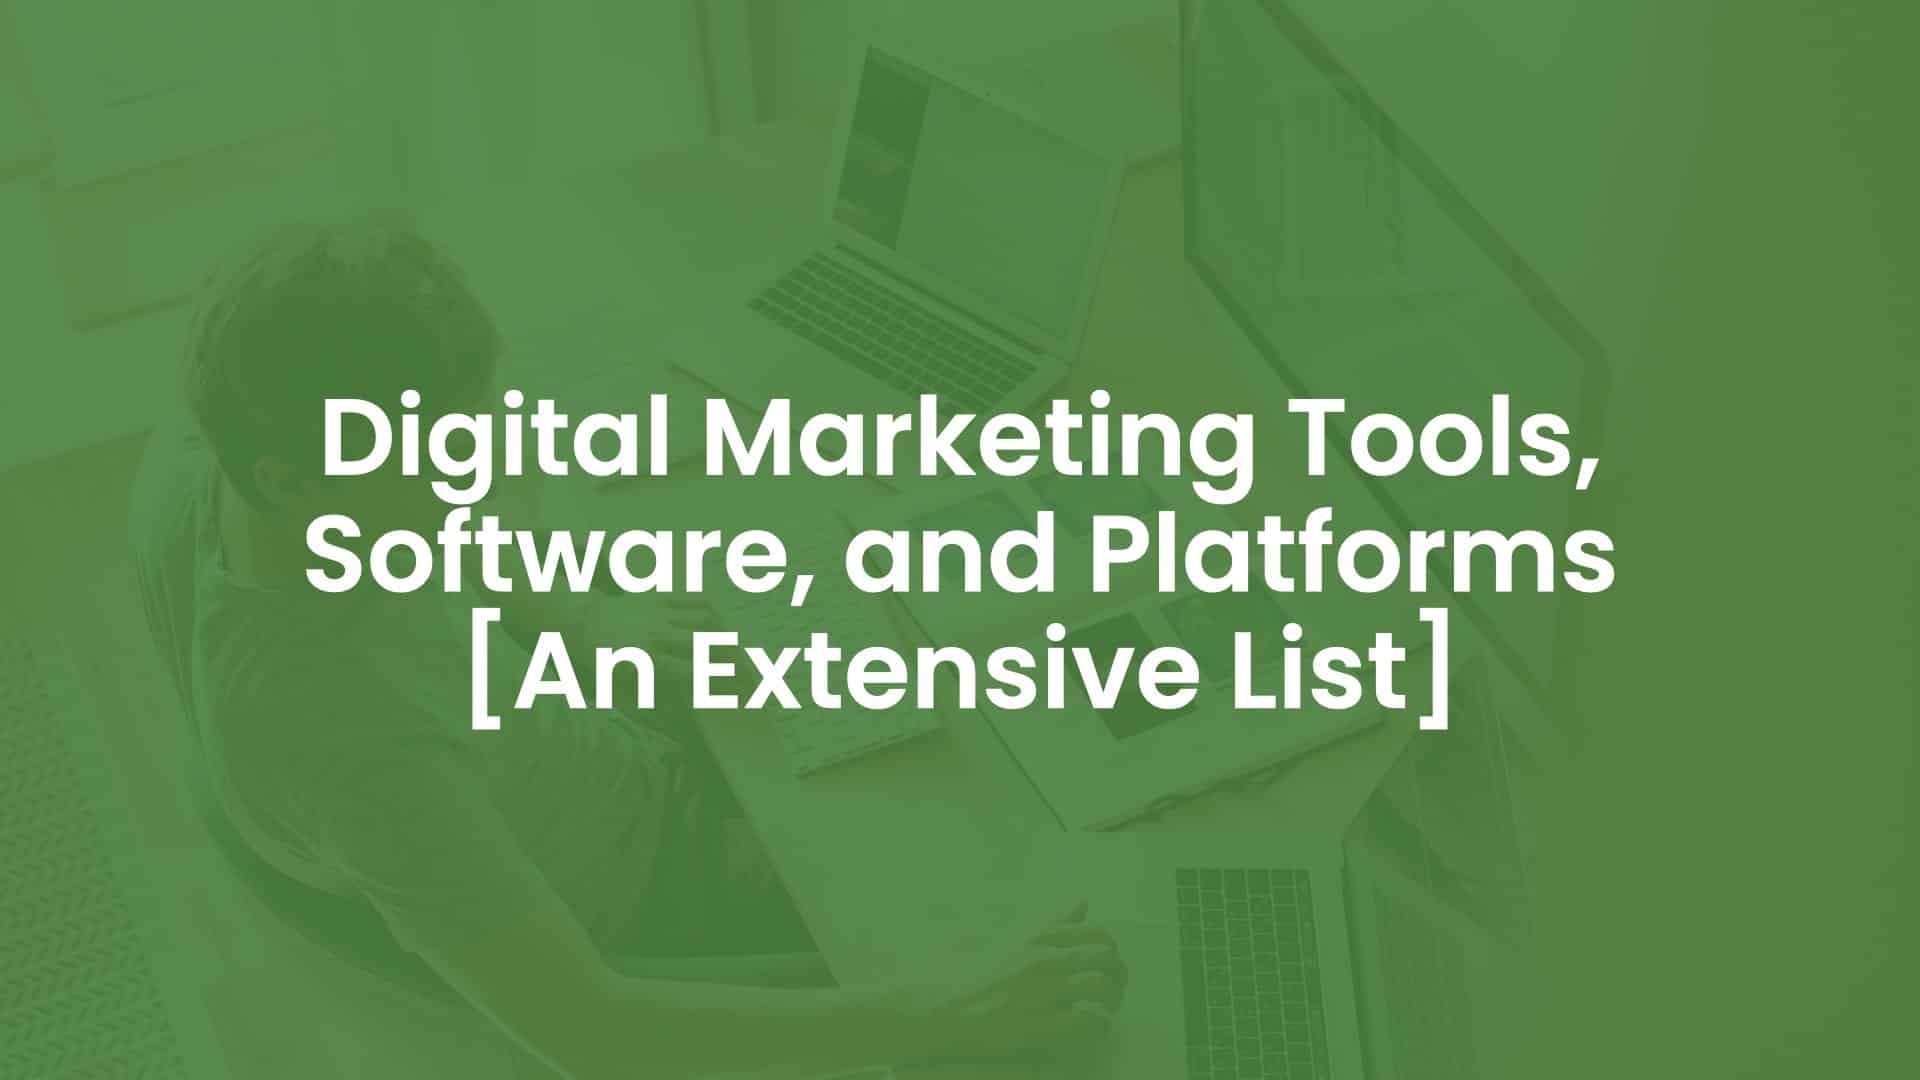 Digital Marketing Tools, Software, and Platforms [An Extensive List] cover